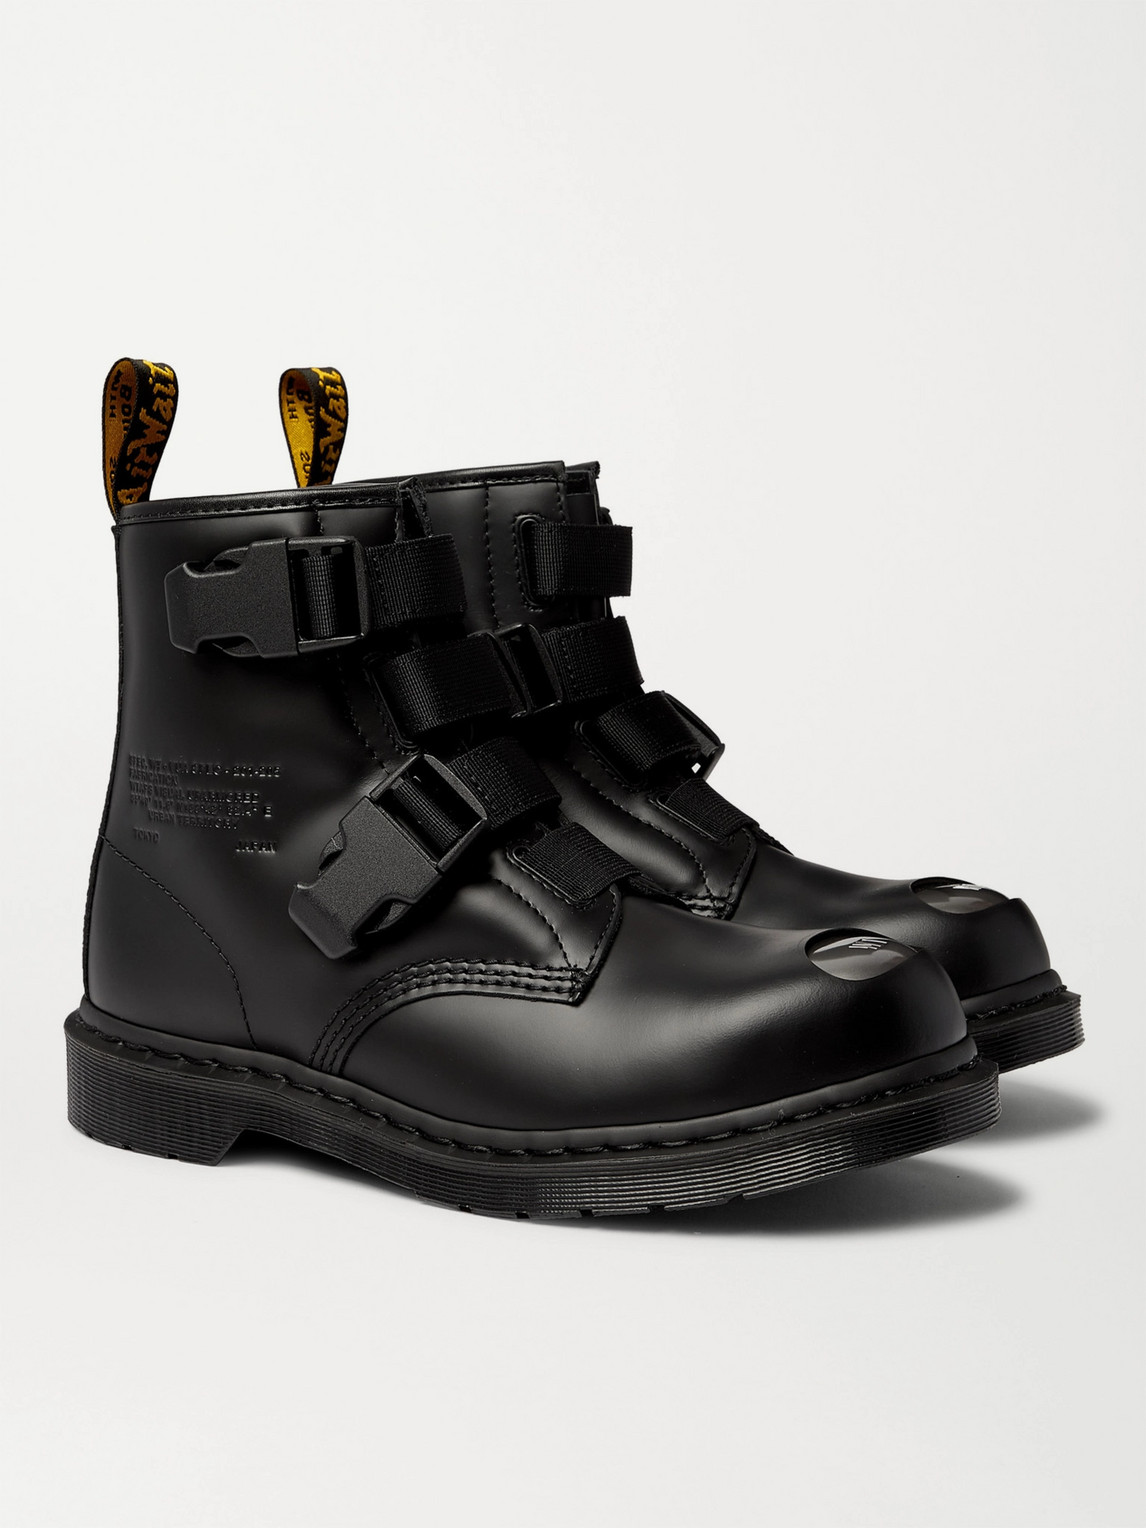 DR. MARTENS' WTAPS 1460 LEATHER BOOTS